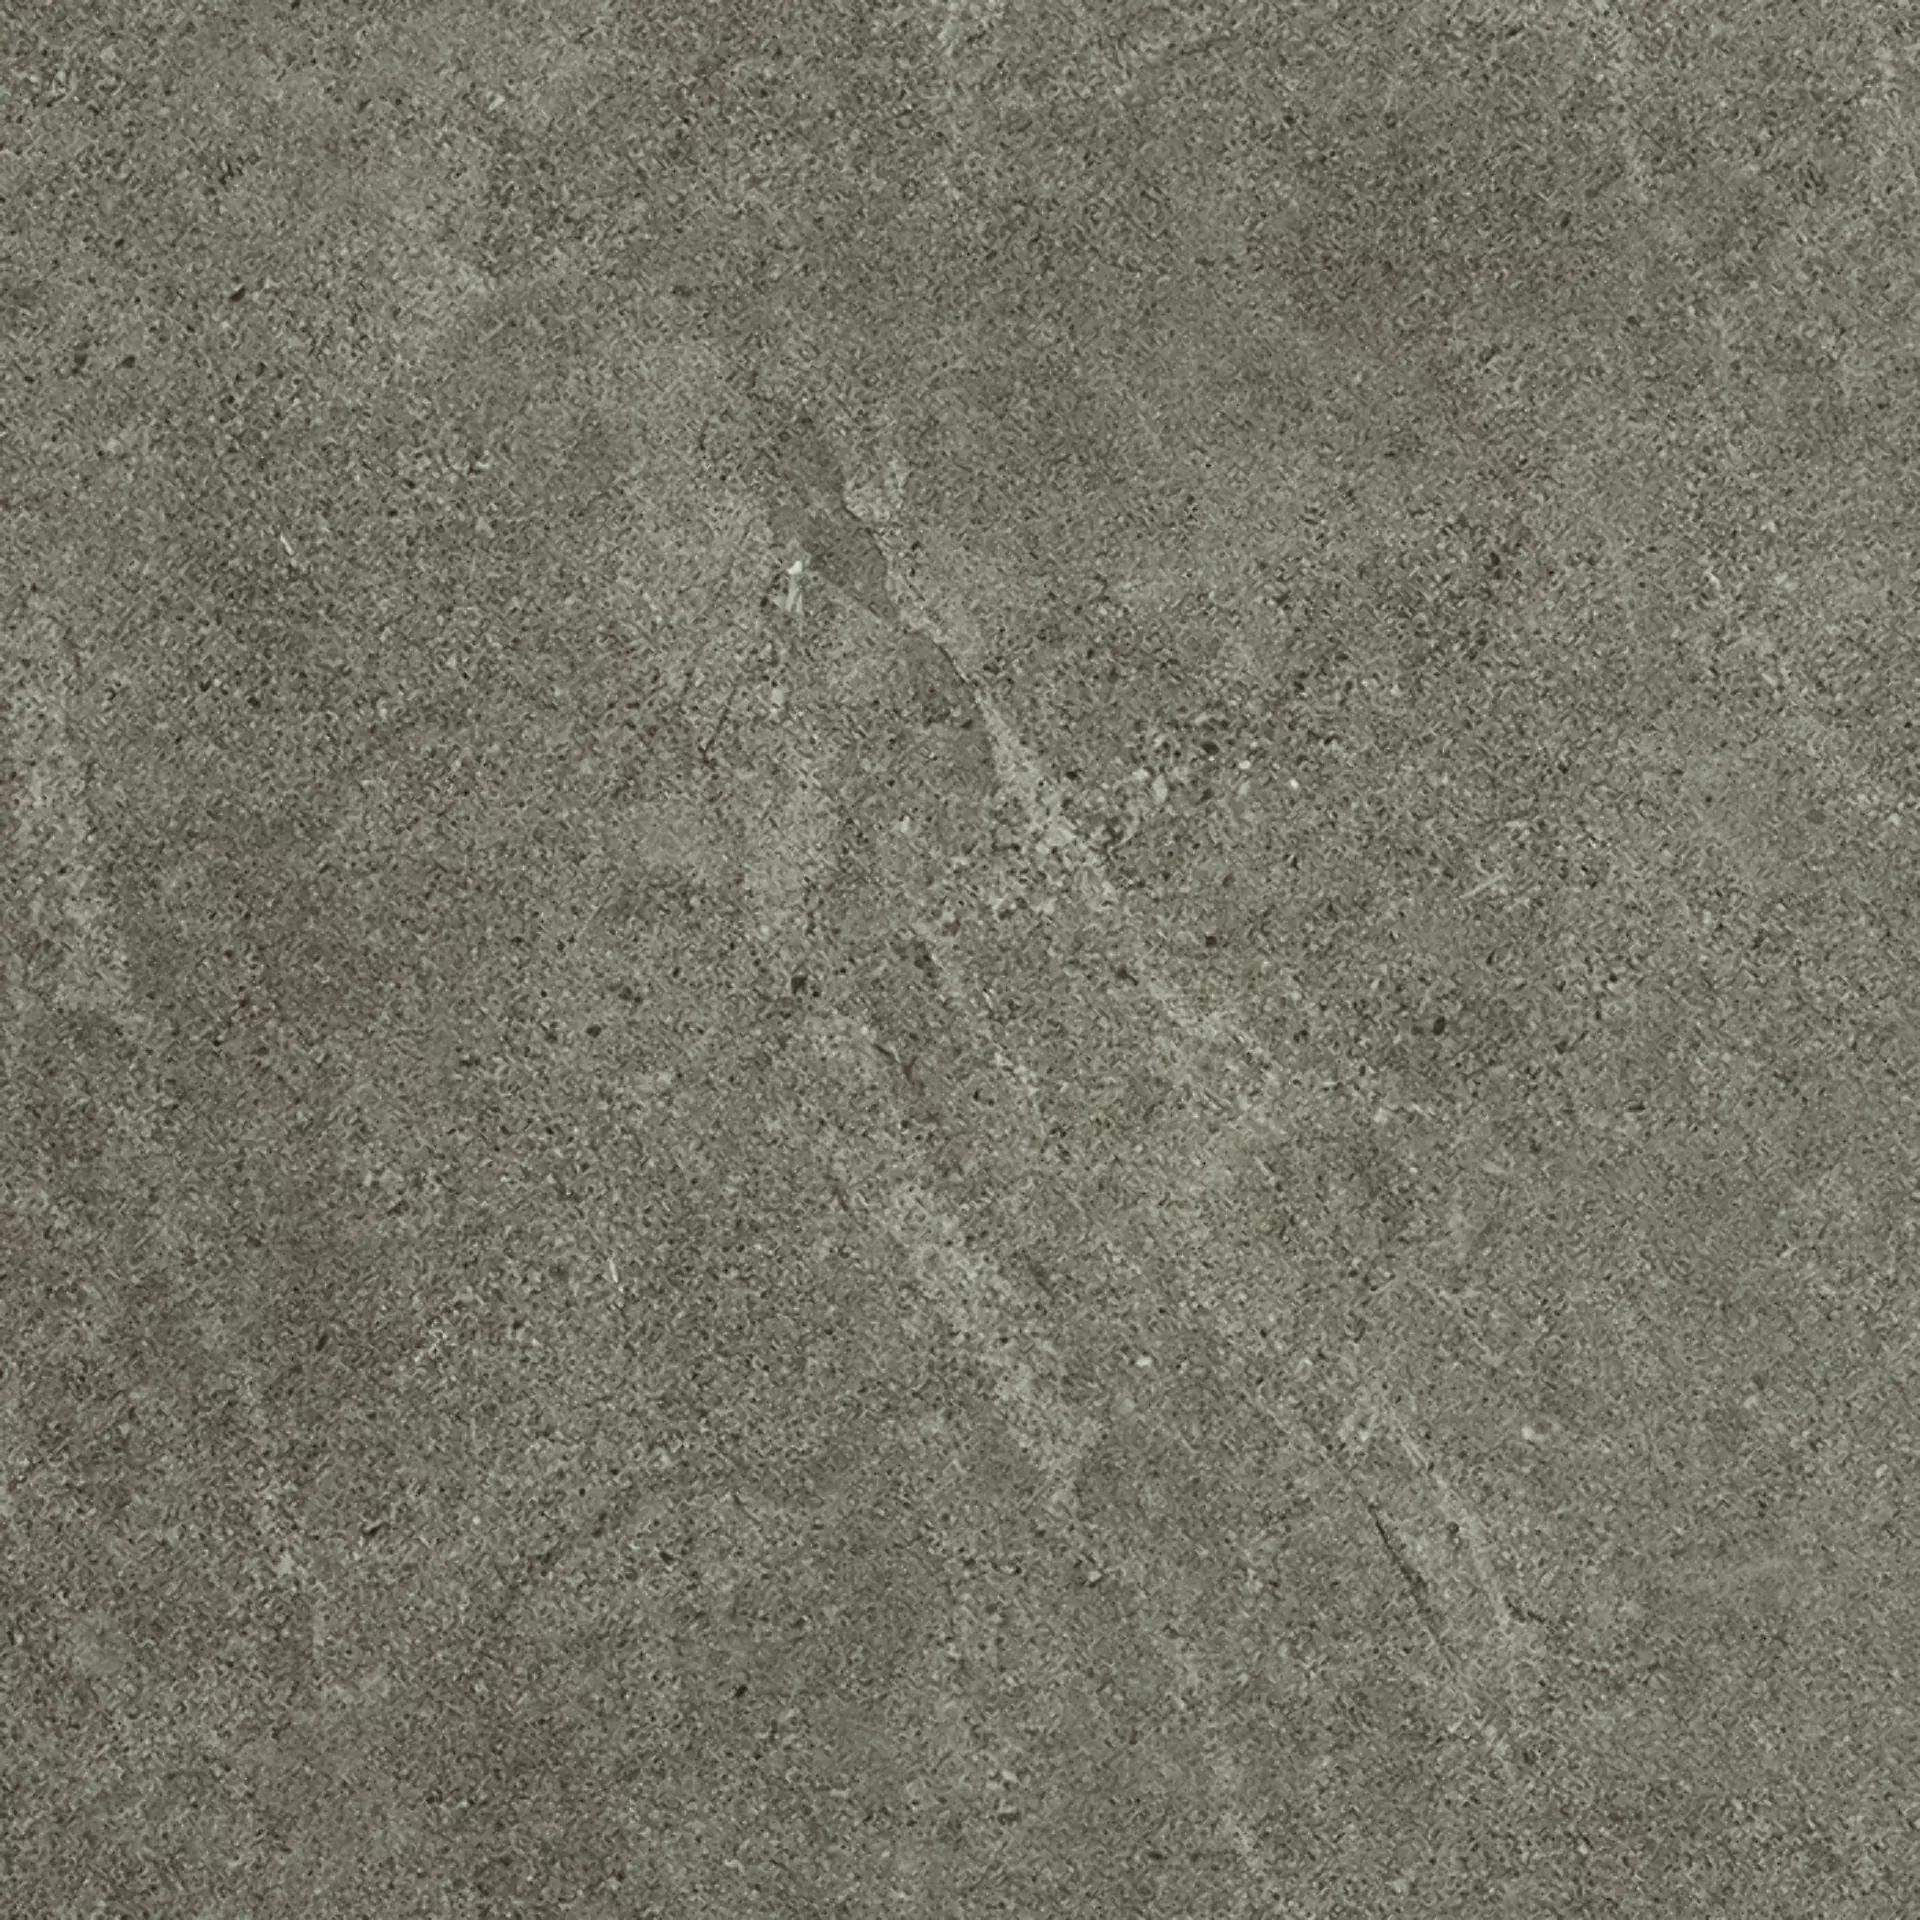 Cercom Archistone Taupe Naturale 1081721 120x120cm rectified 9,5mm